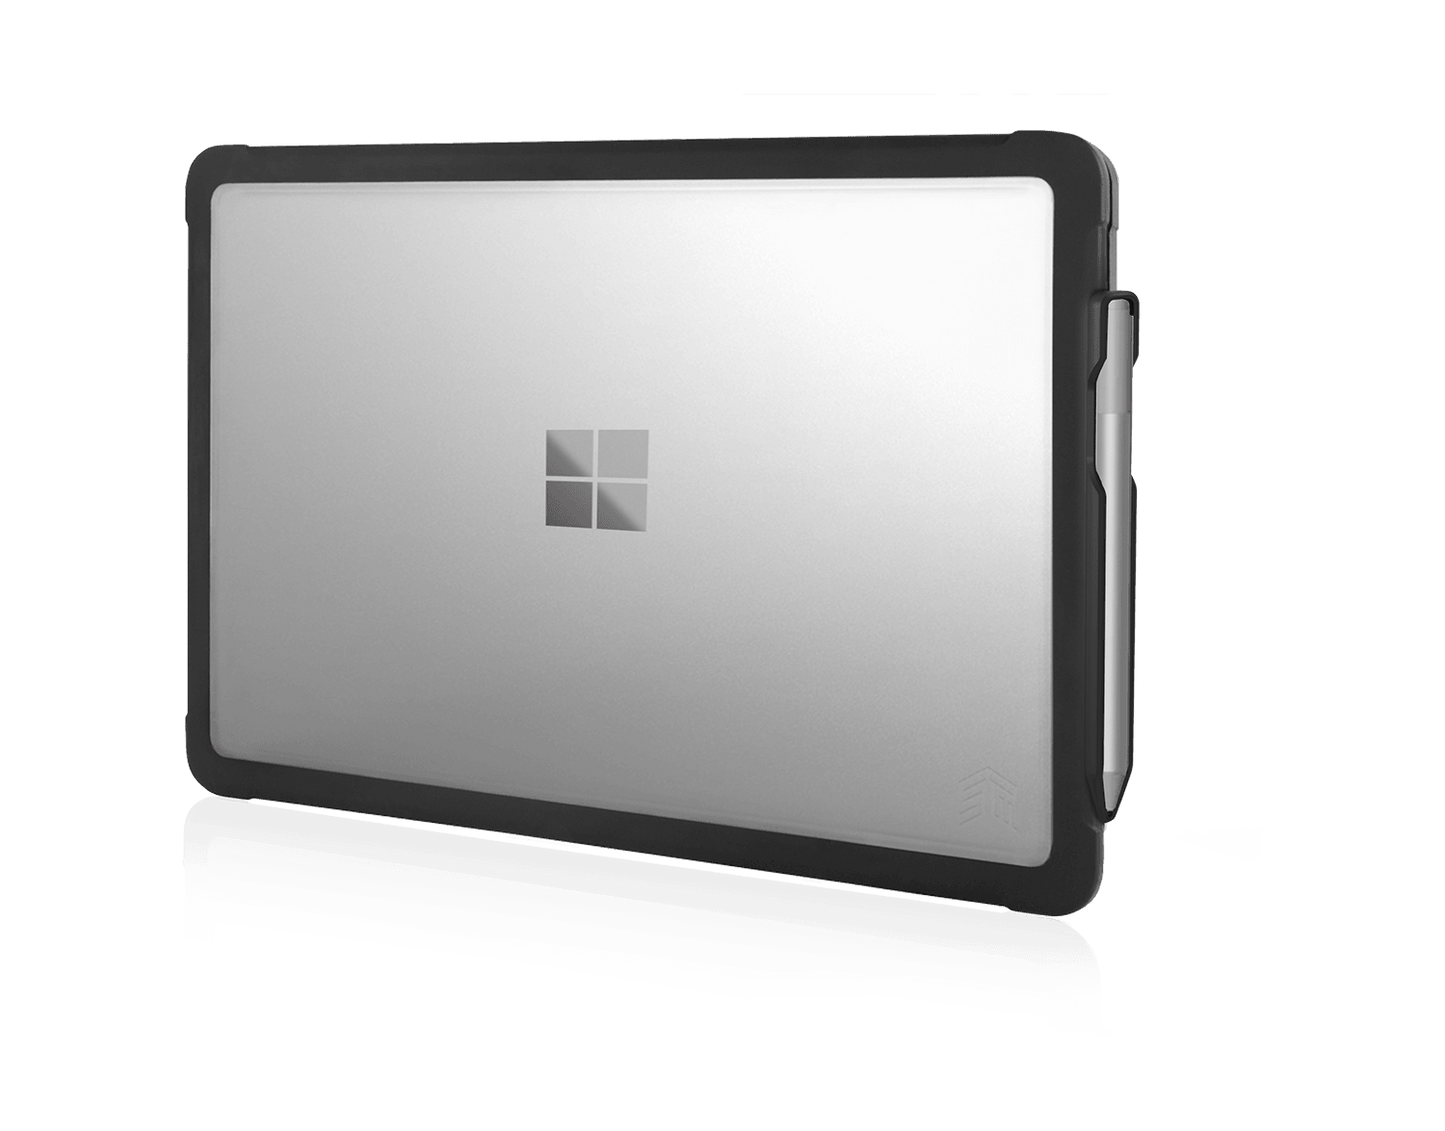 STM DUX Rugged Case for Surface Laptop 2/3/4/5 - Marknet Technology